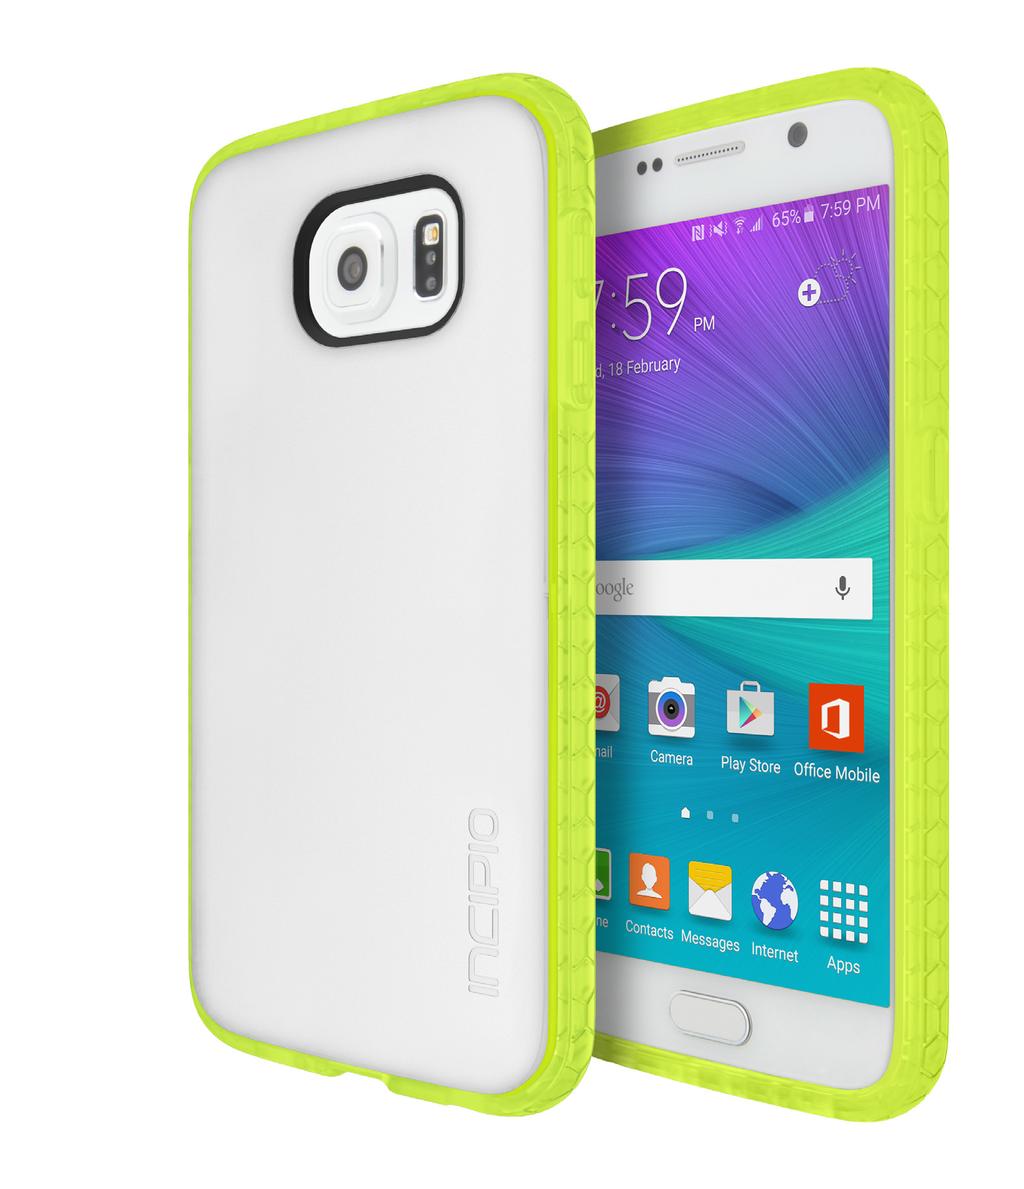 Octane Co-molded Protective Case Incipio s impact absorbing Octane Case is precision engineered with a rigid Plextonium polycarbonate back shell and a shock absorbent Flex 2 O TPU textured bumper.